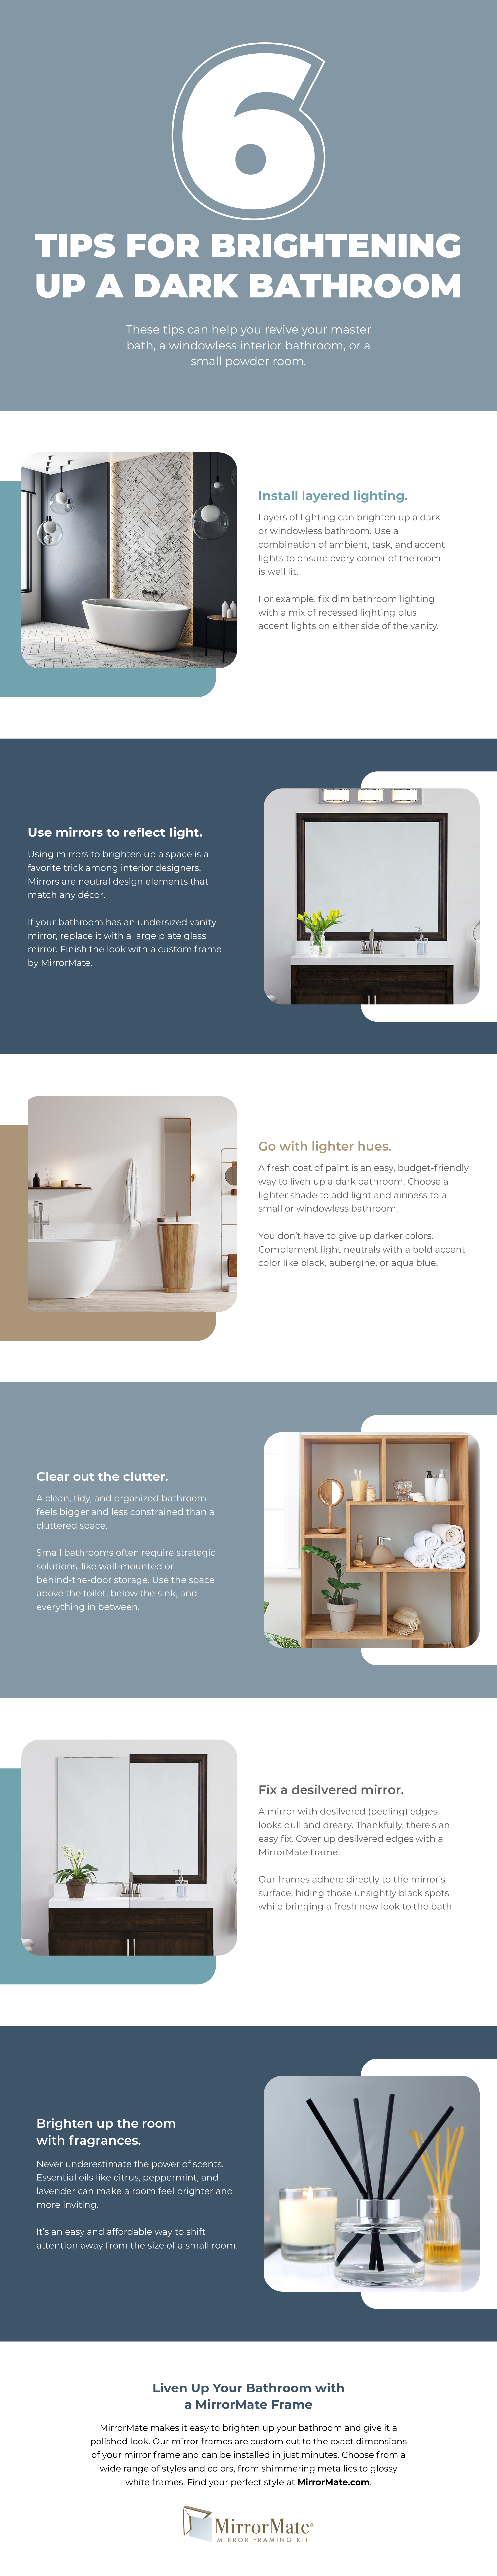 Tips for Brightening Up a Dark Bathroom Infographic